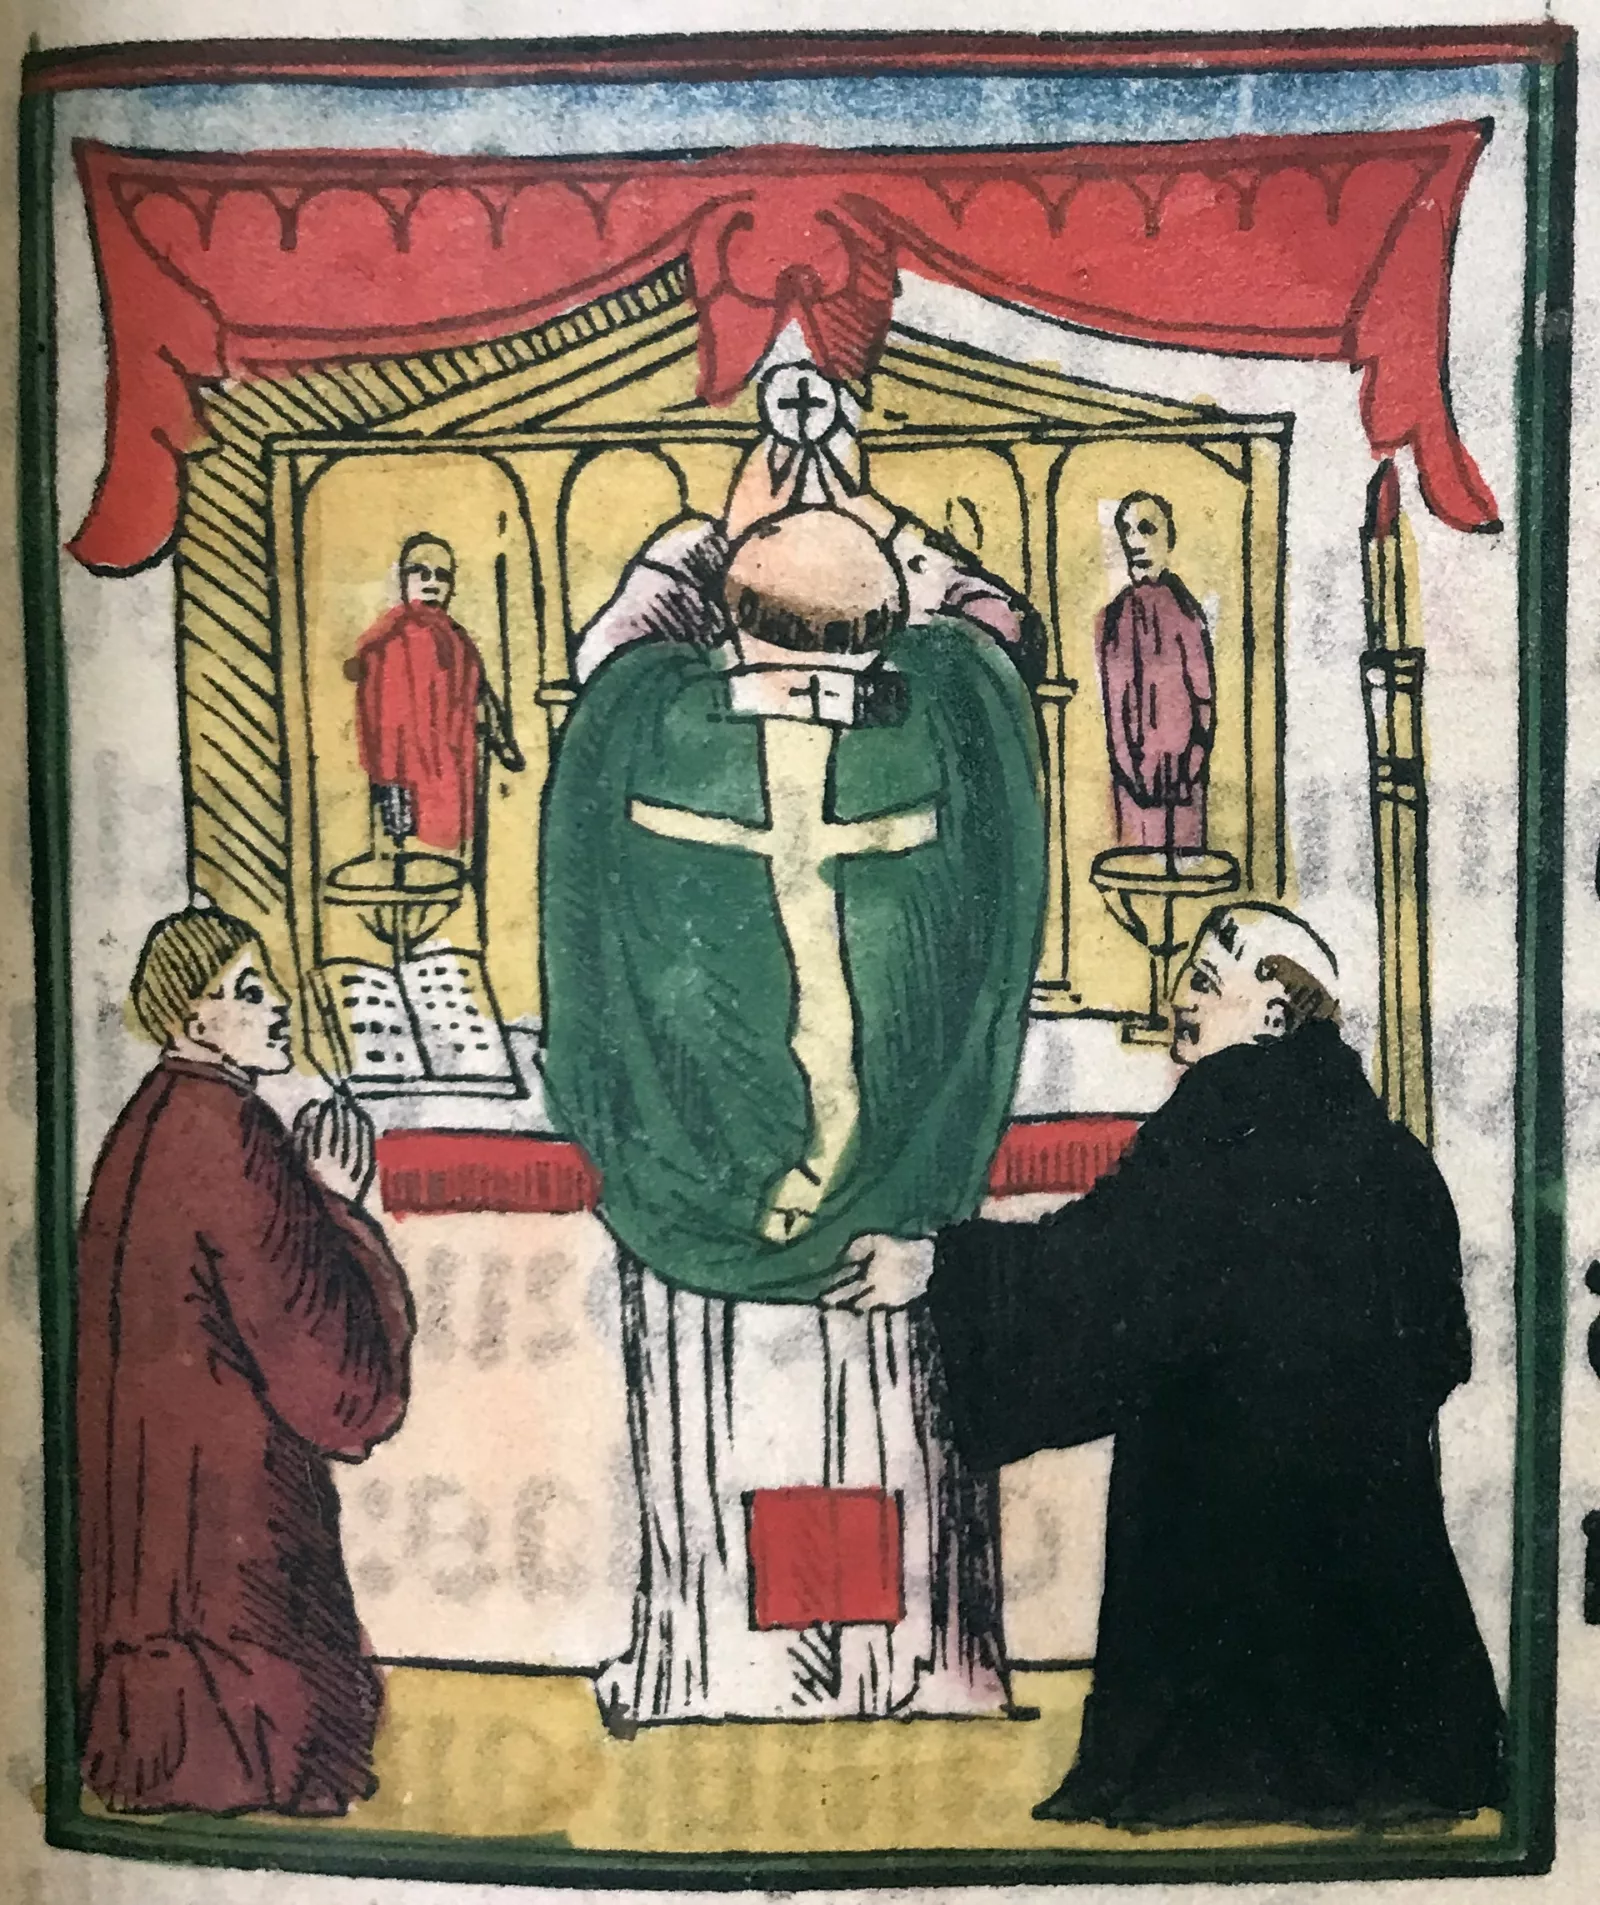 Illustration of the Mass of St. Gregory. A priest adorned in a green cloth stands at the altar. A missal sits on the altarpiece.